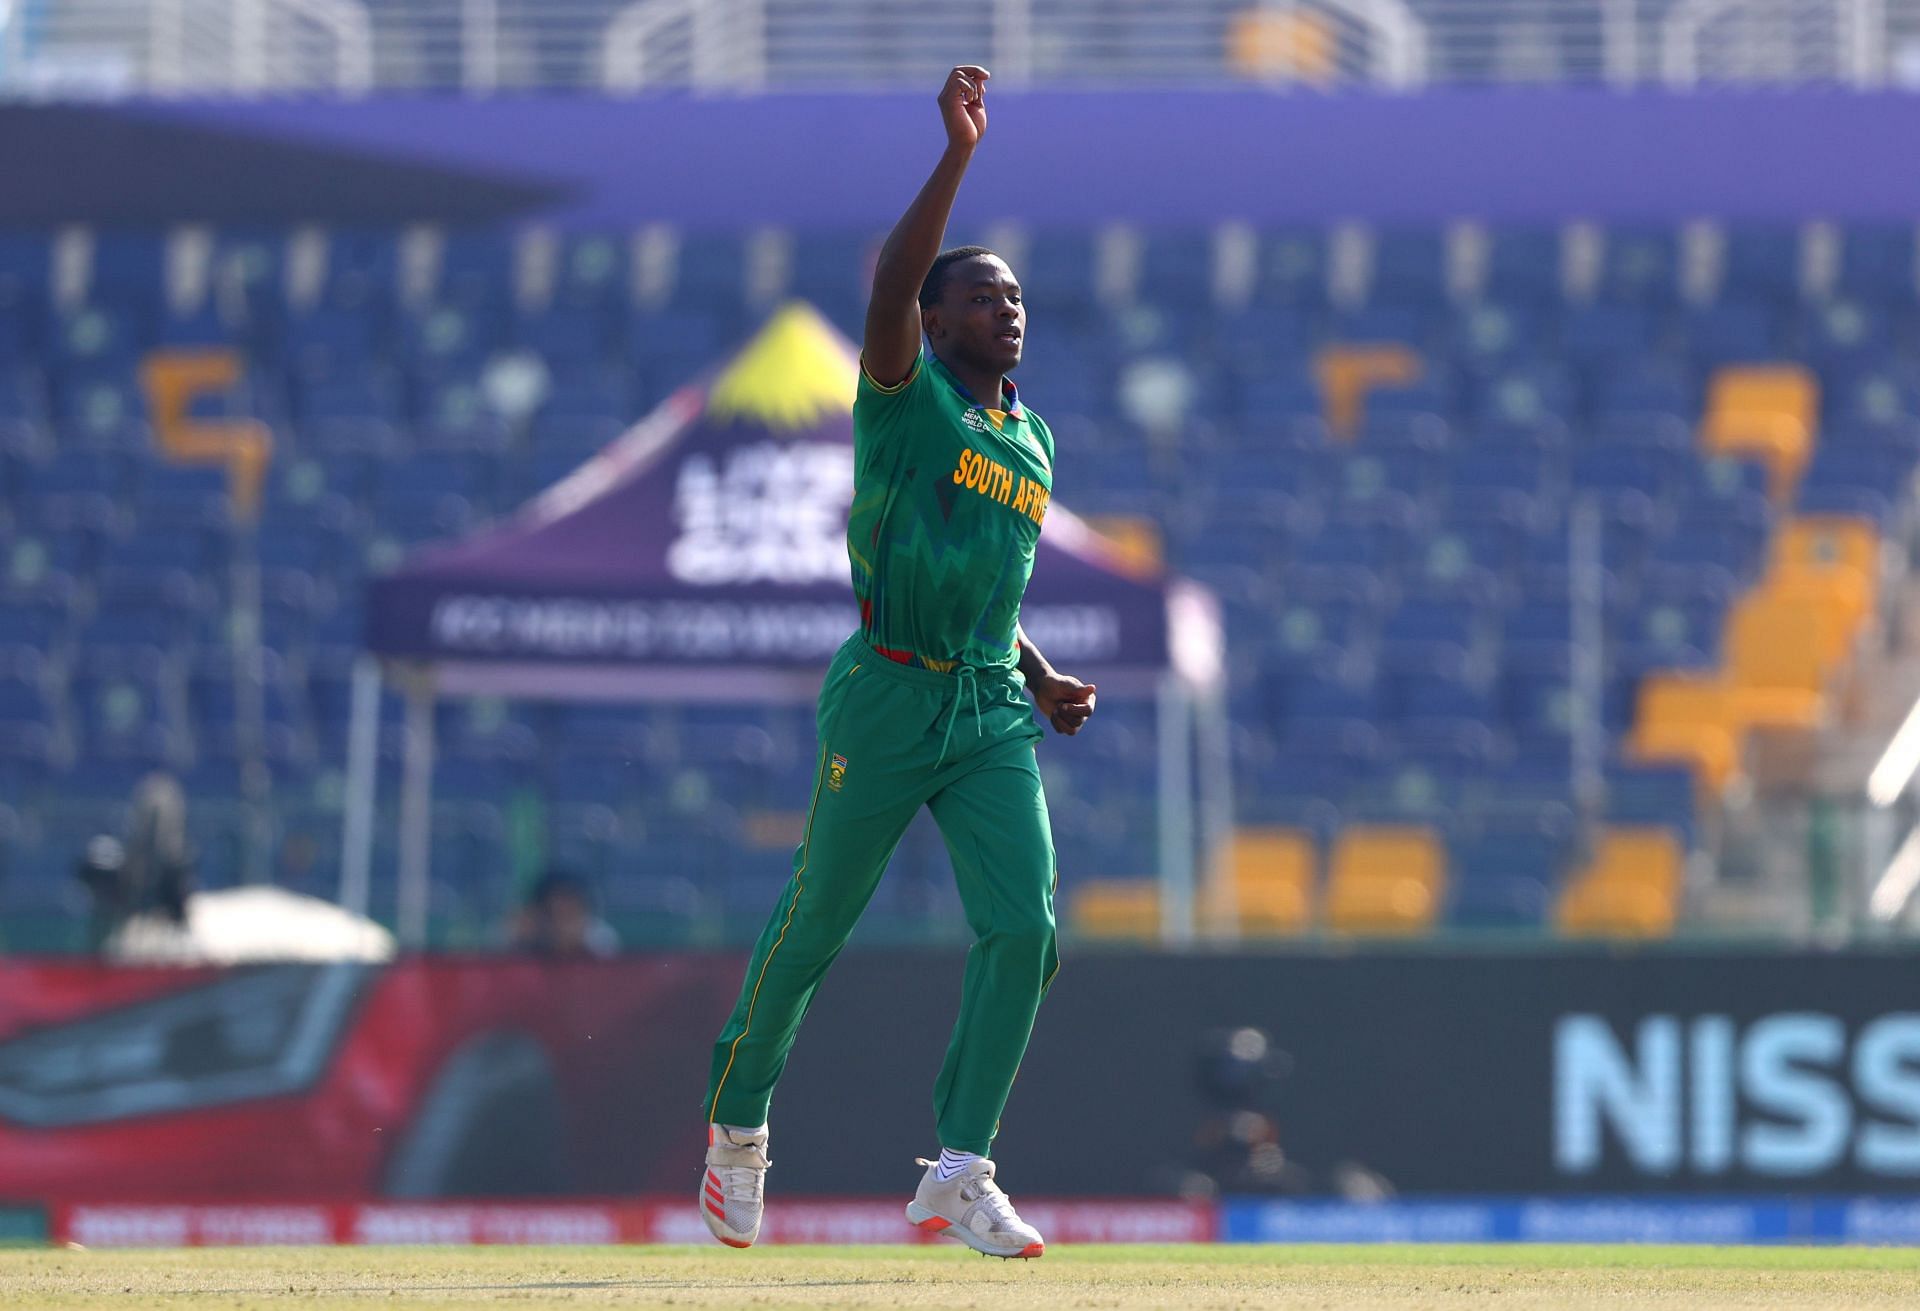 Rabada could be a challenge in the backend of the innings